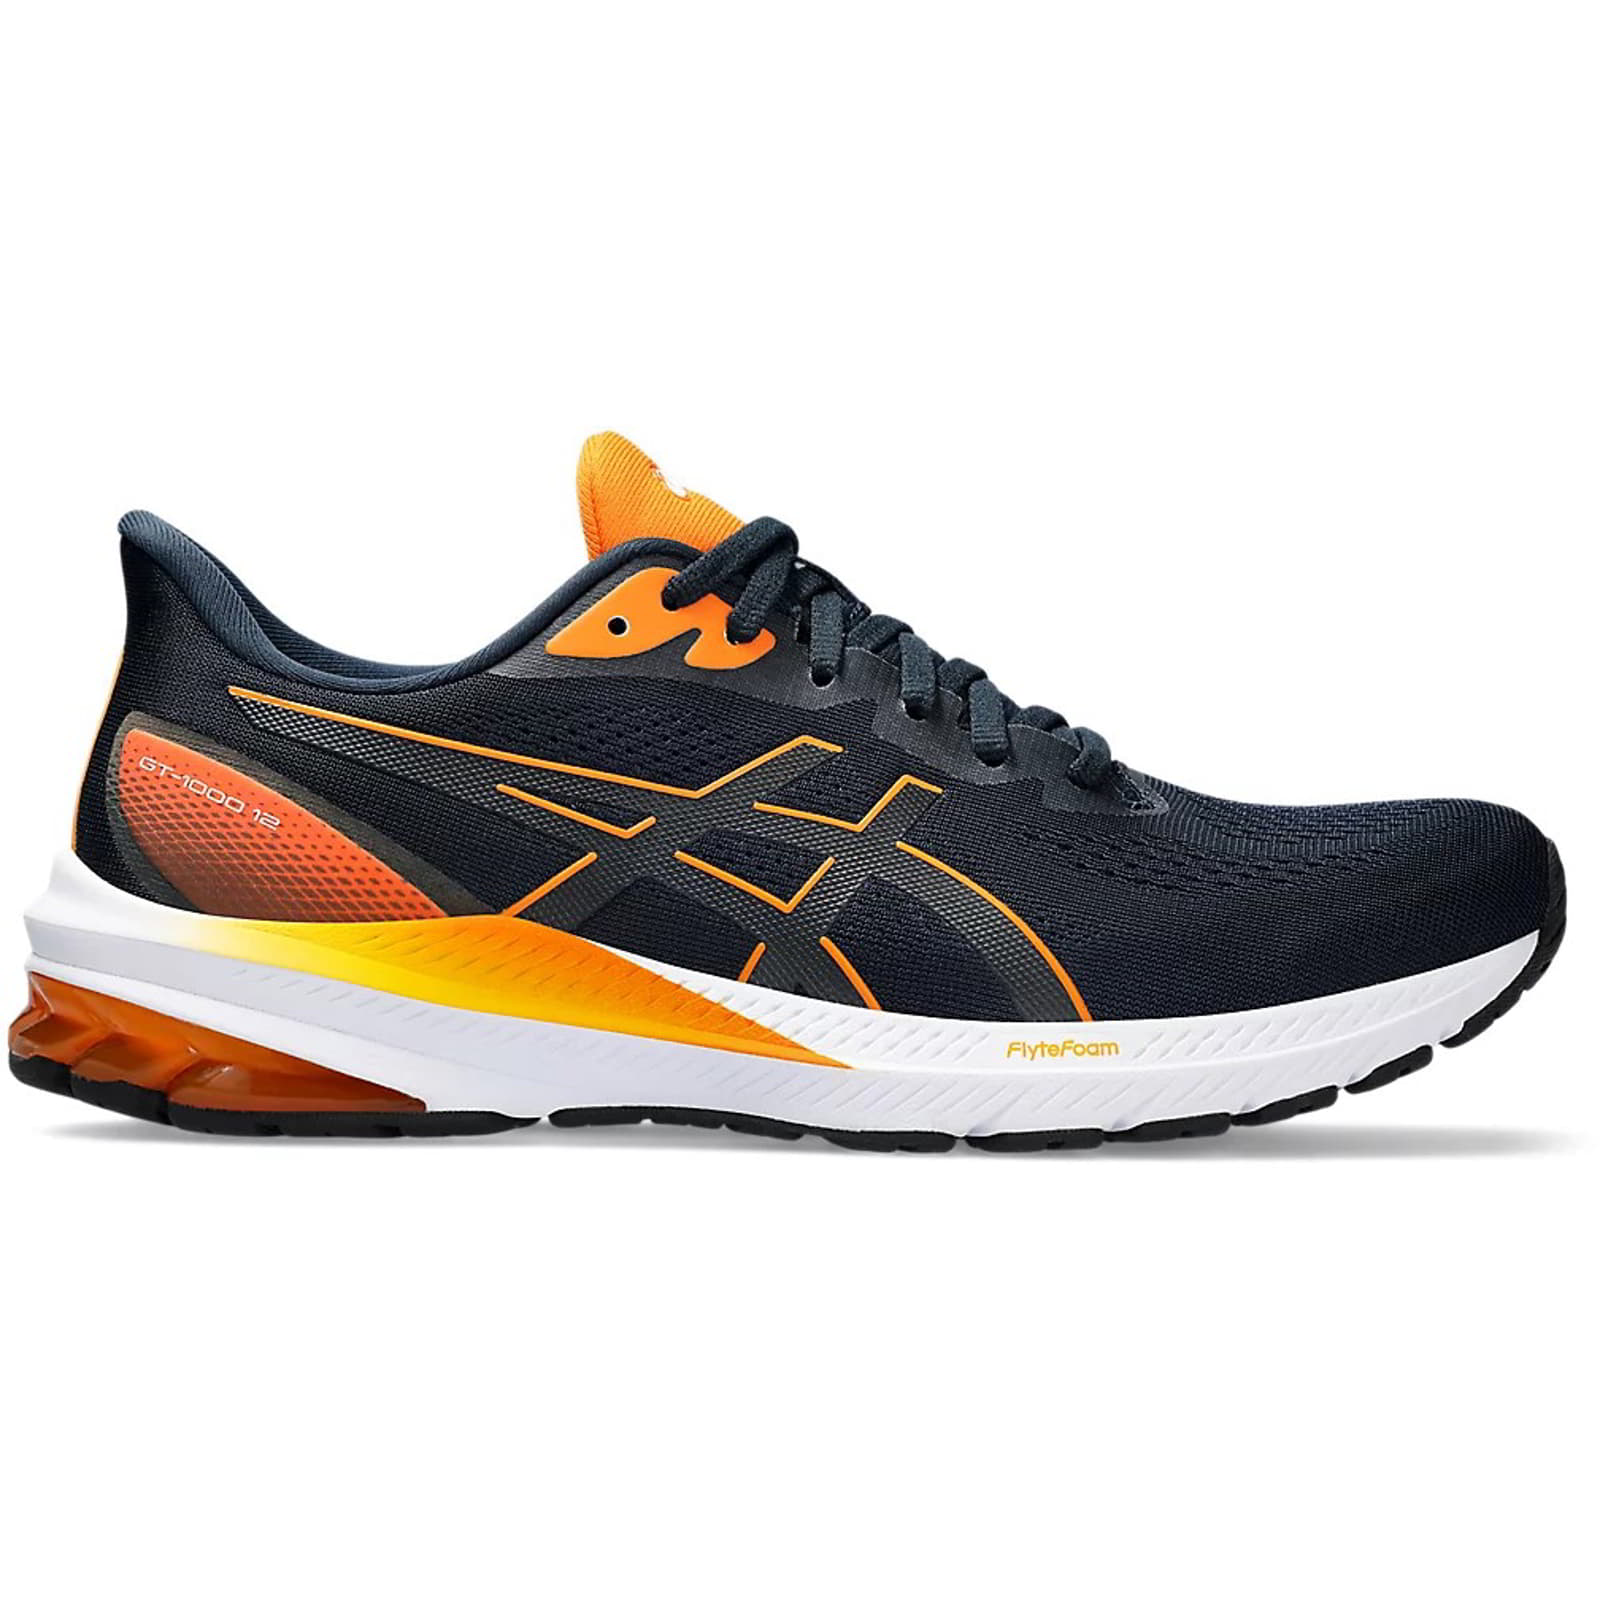 Asics Men's GT-1000 12 Running Shoes Trainers - UK 10